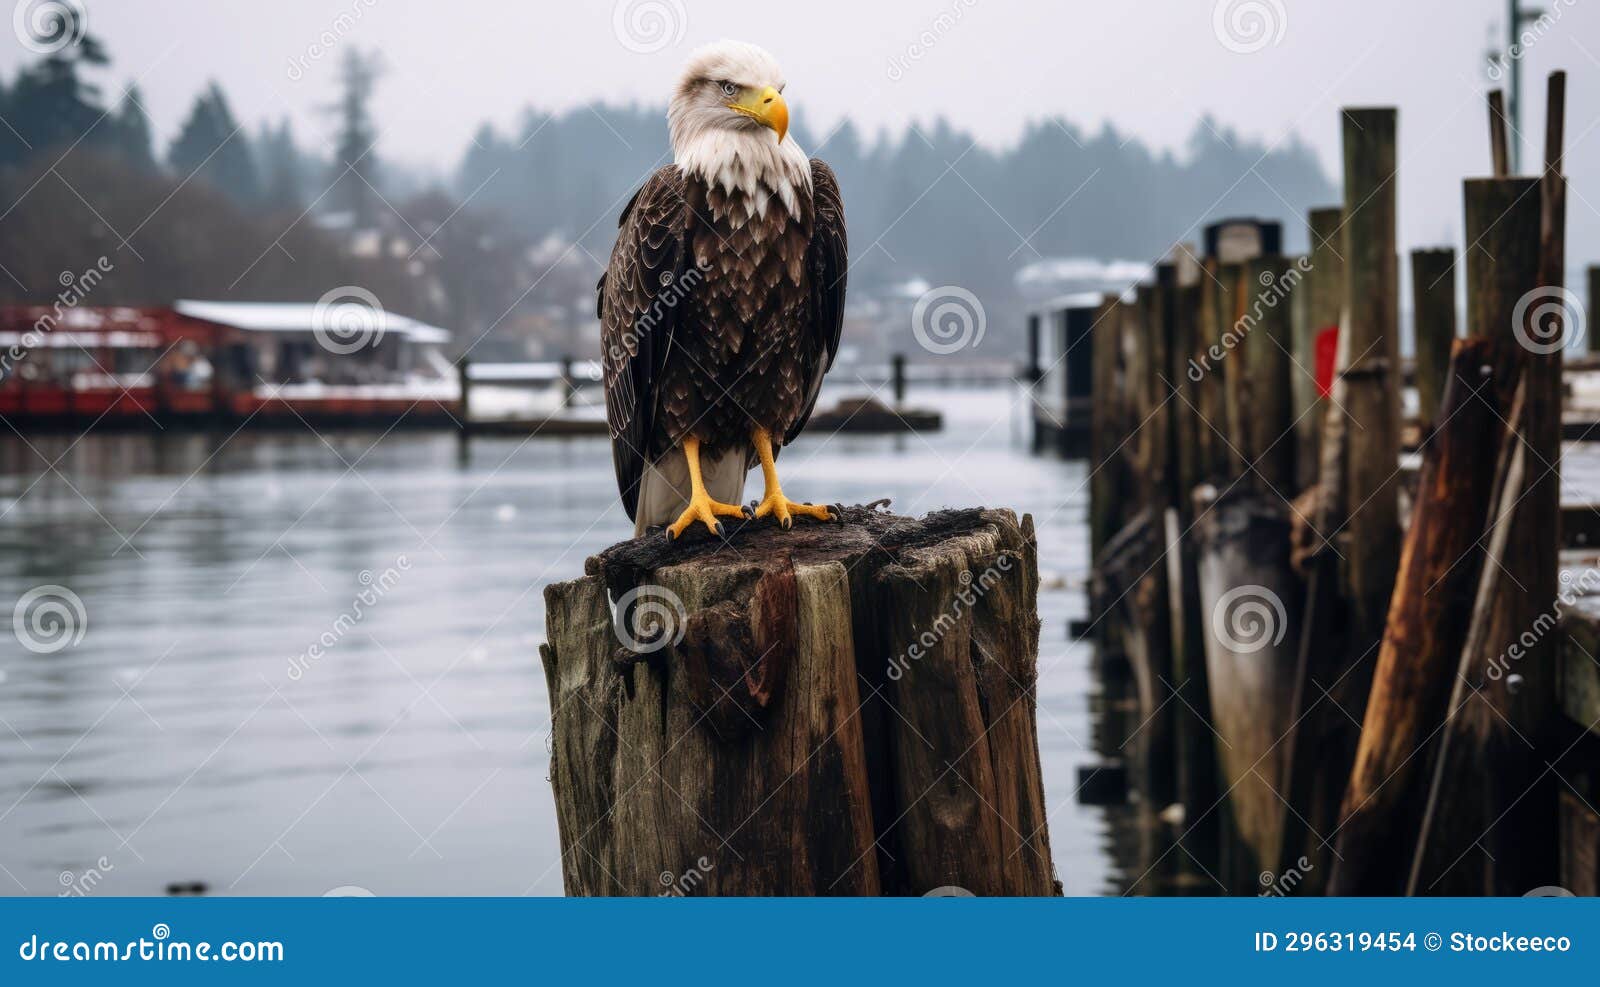 gloomy documentary-style photo of bald eagle on wooden pier